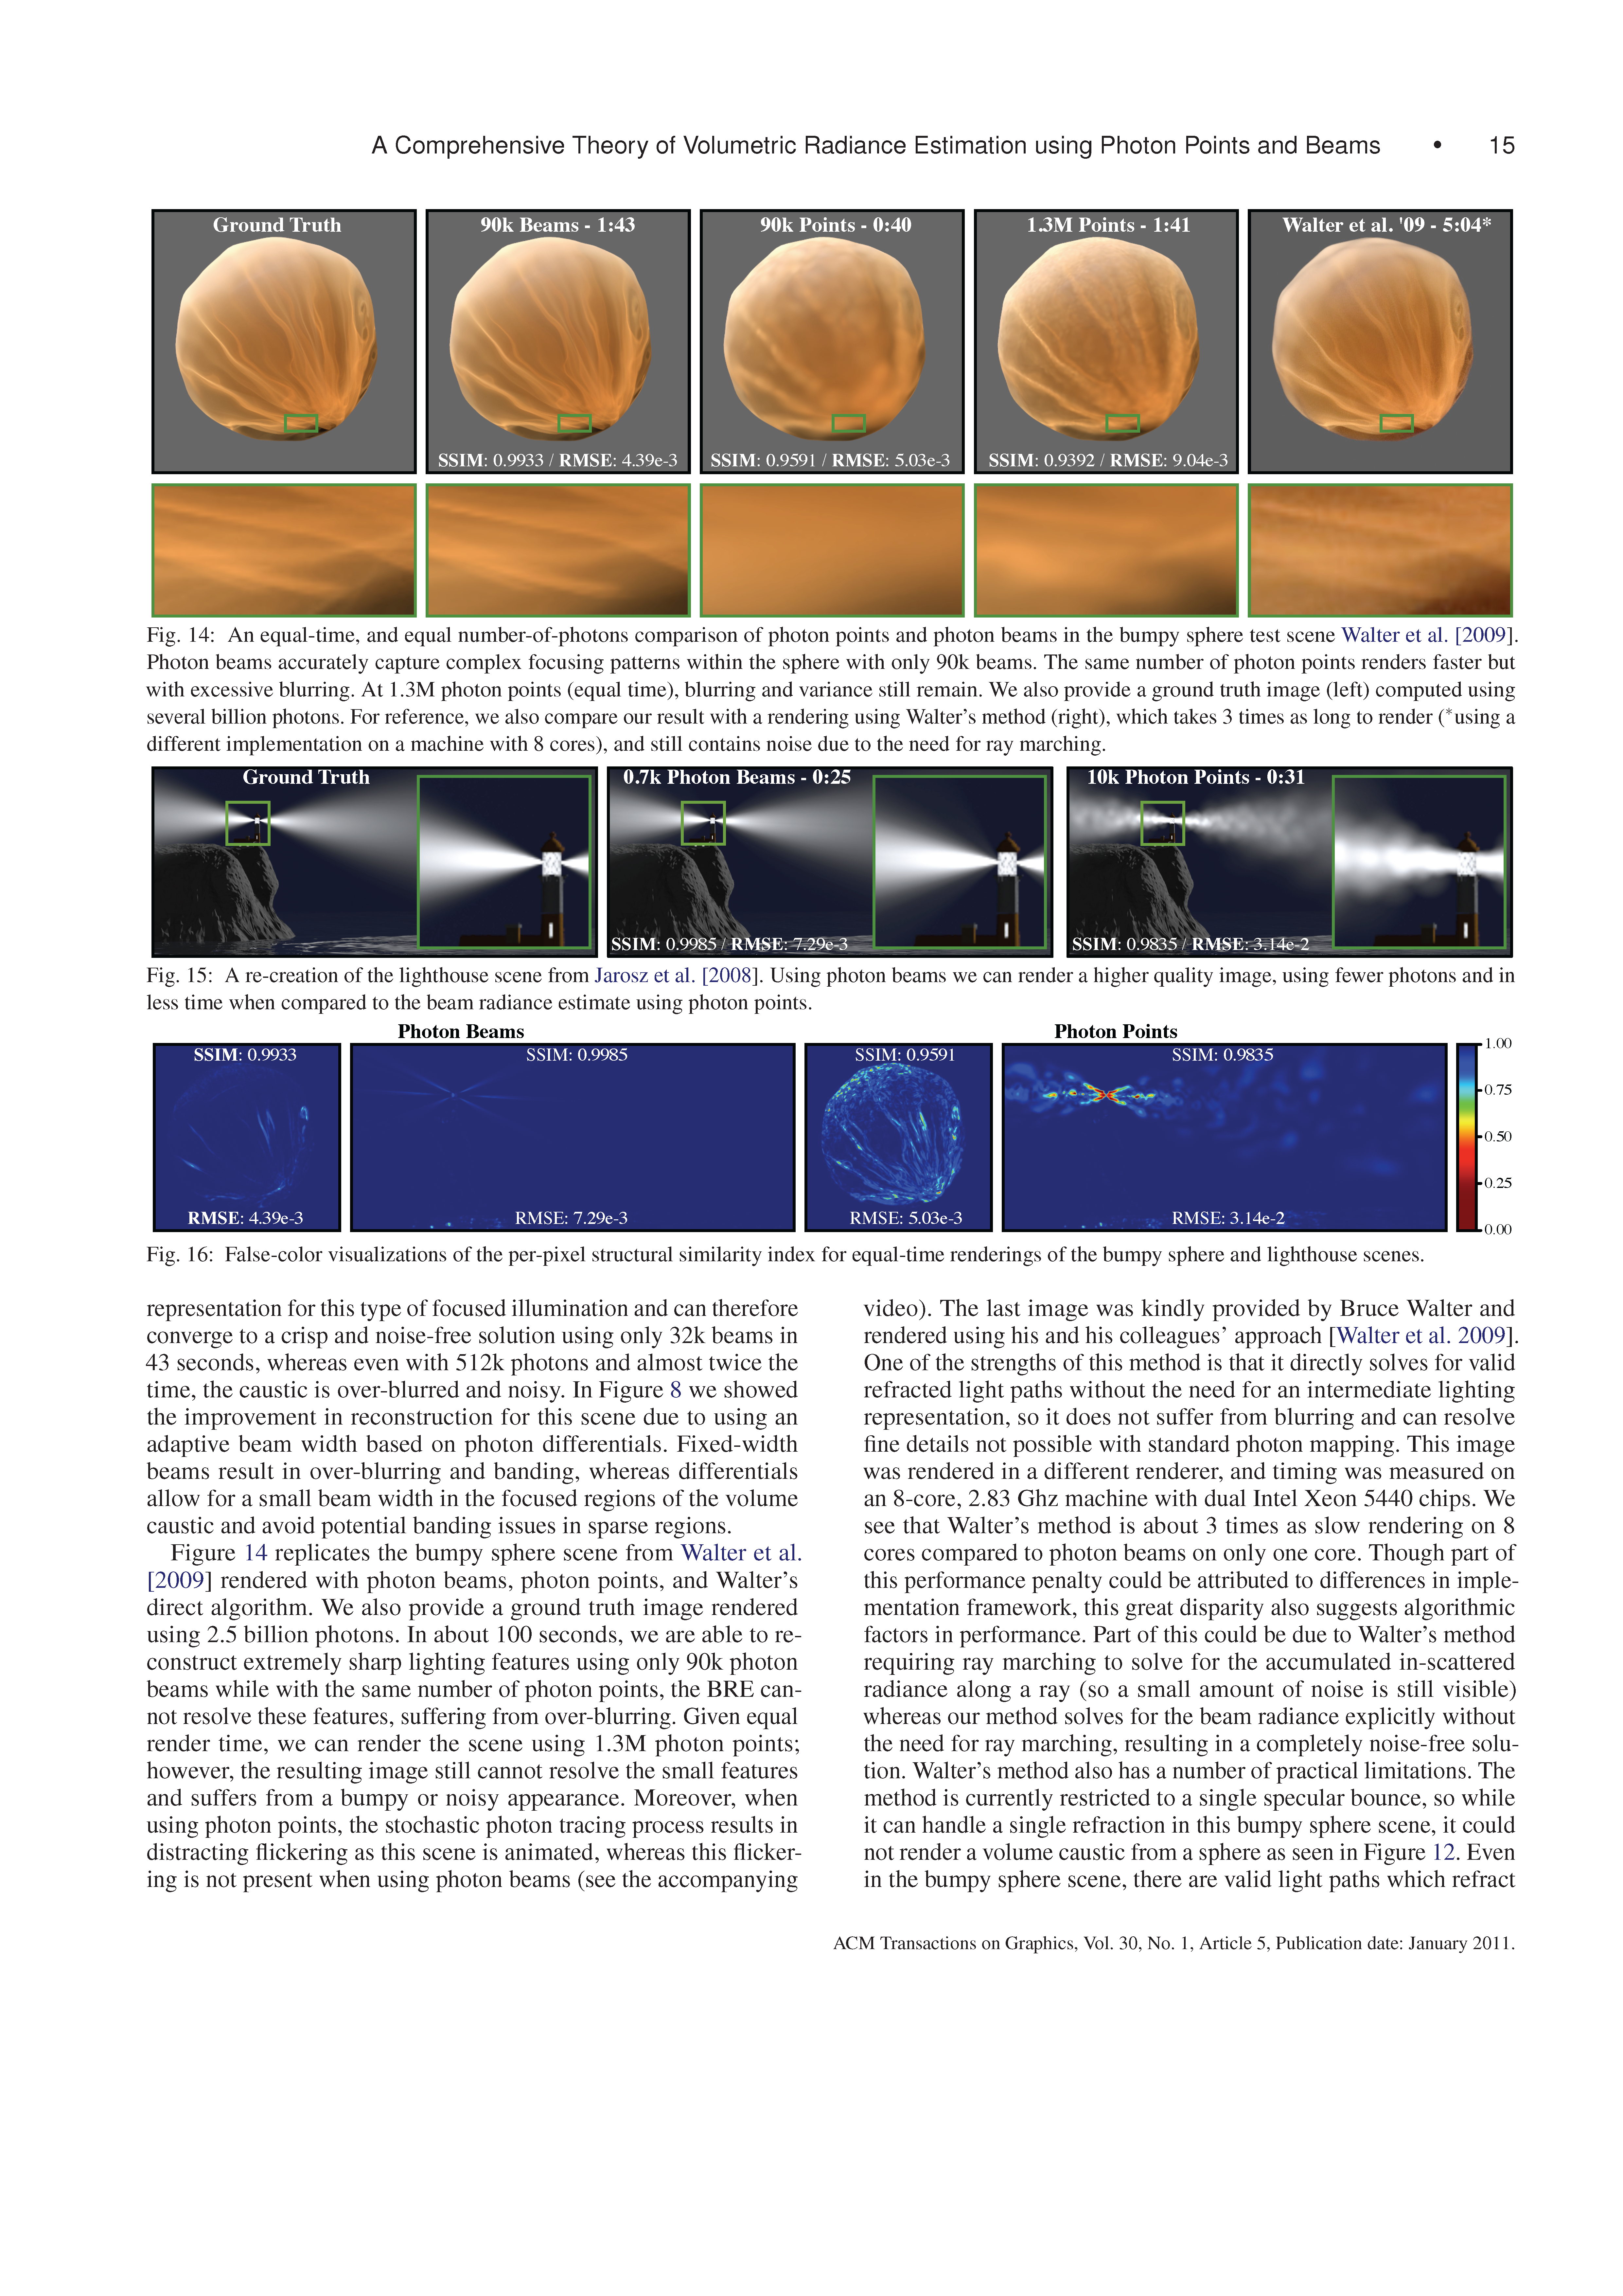 A Comprehensive Theory of Volumetric Radiance Estimation Using Photon Points and Beams Page 15